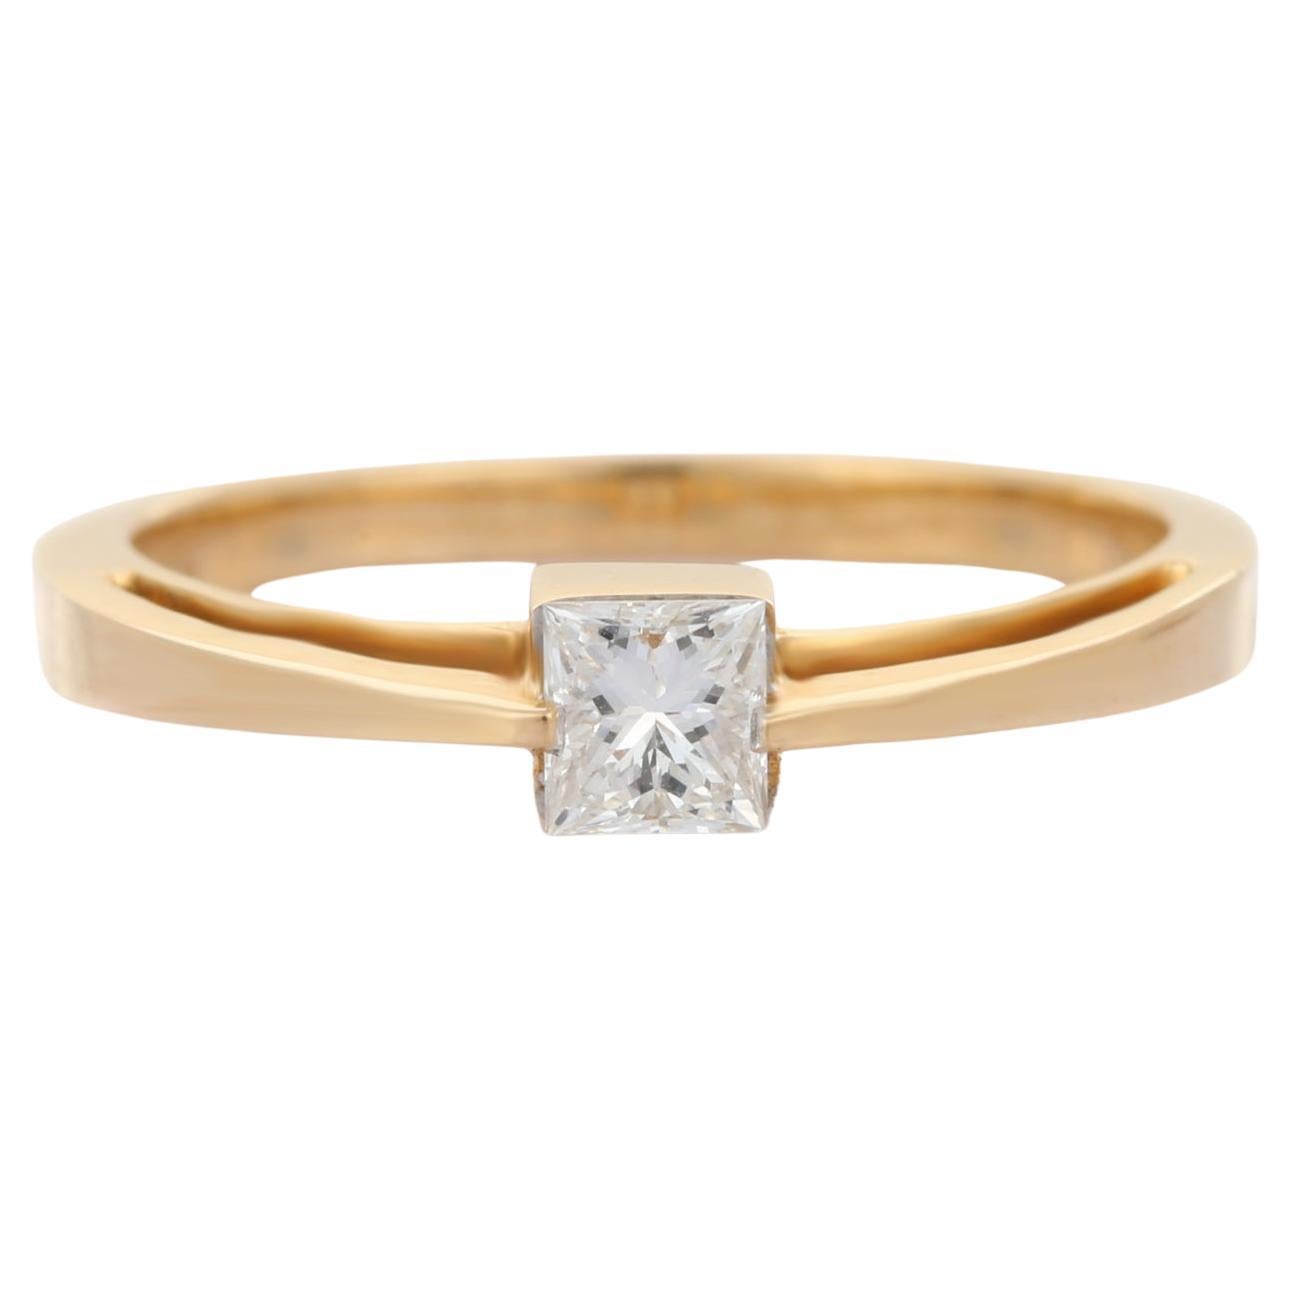 18K Yellow Gold Diamond Solitaire Ring